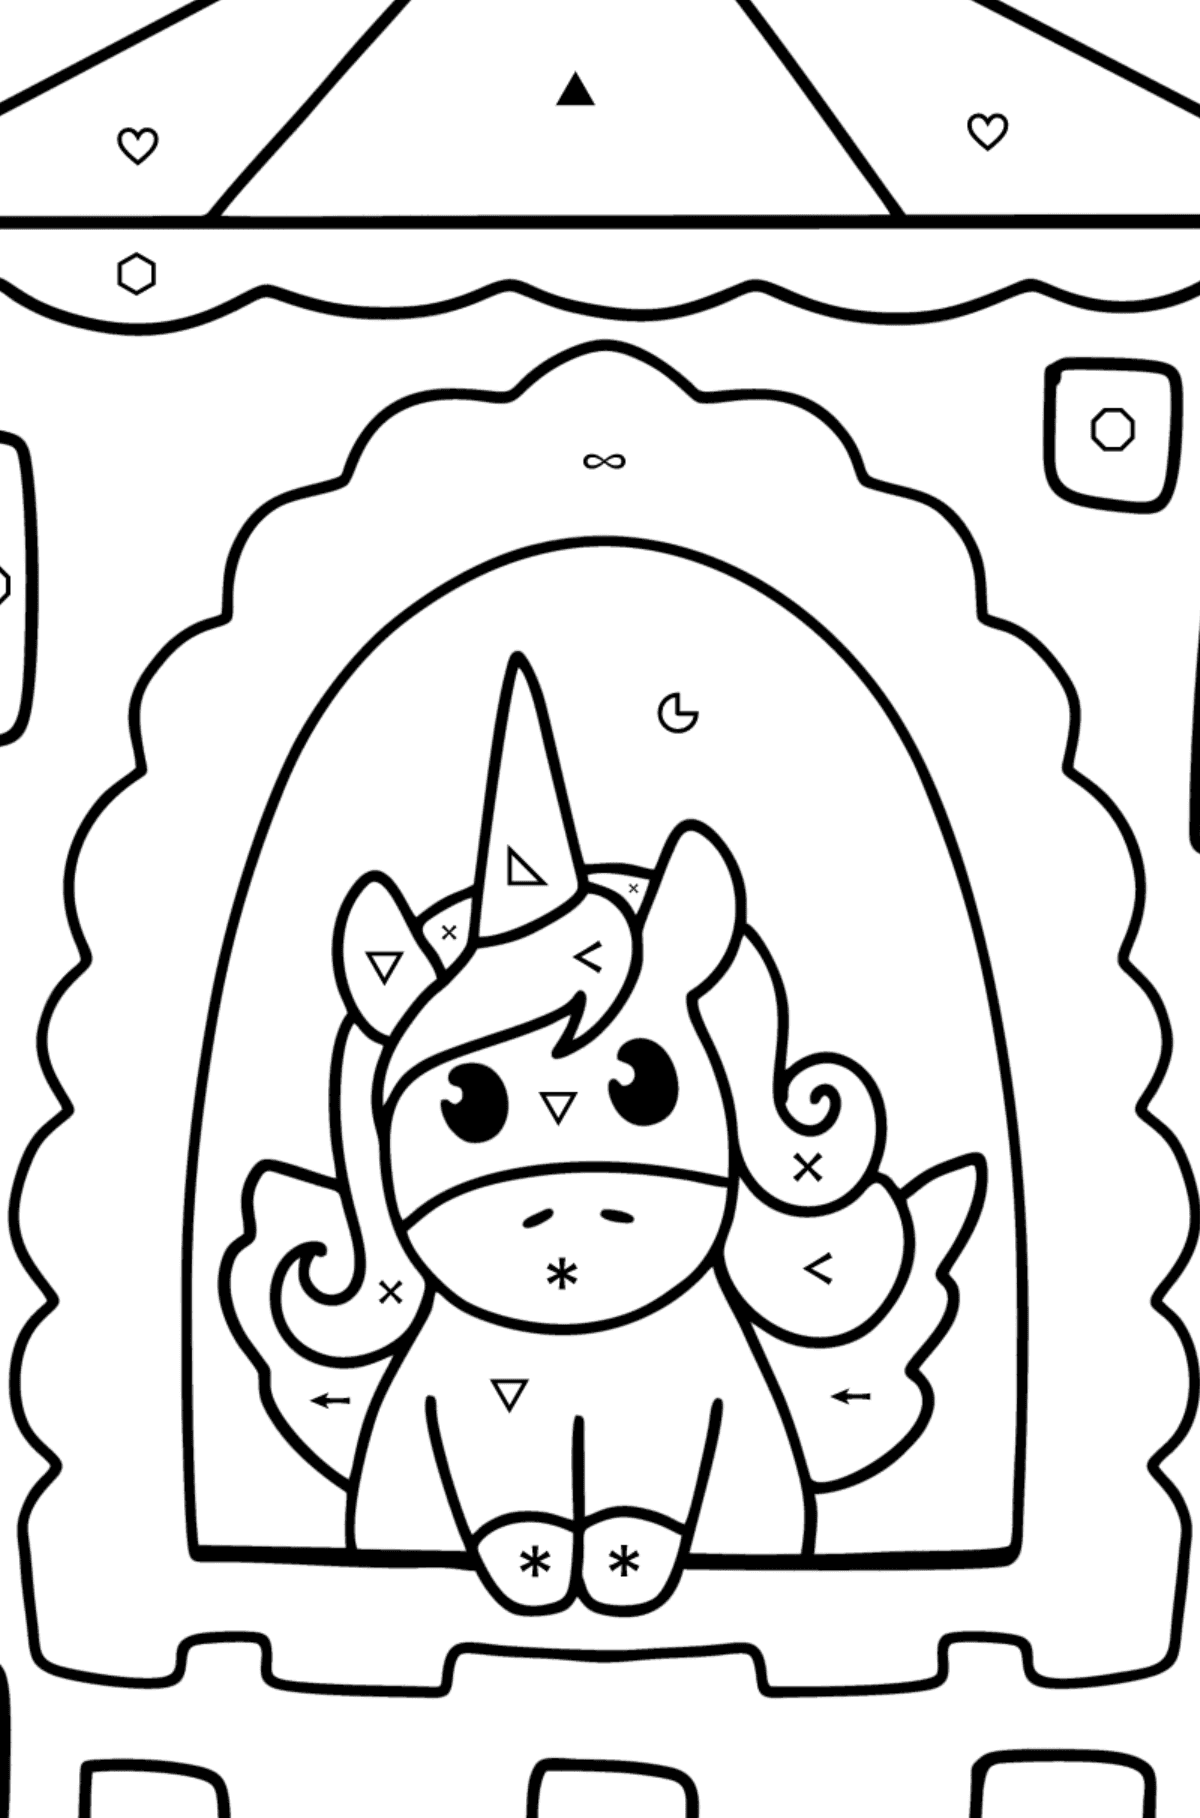 Unicorn in fairyland coloring page - Coloring by Symbols and Geometric Shapes for Kids